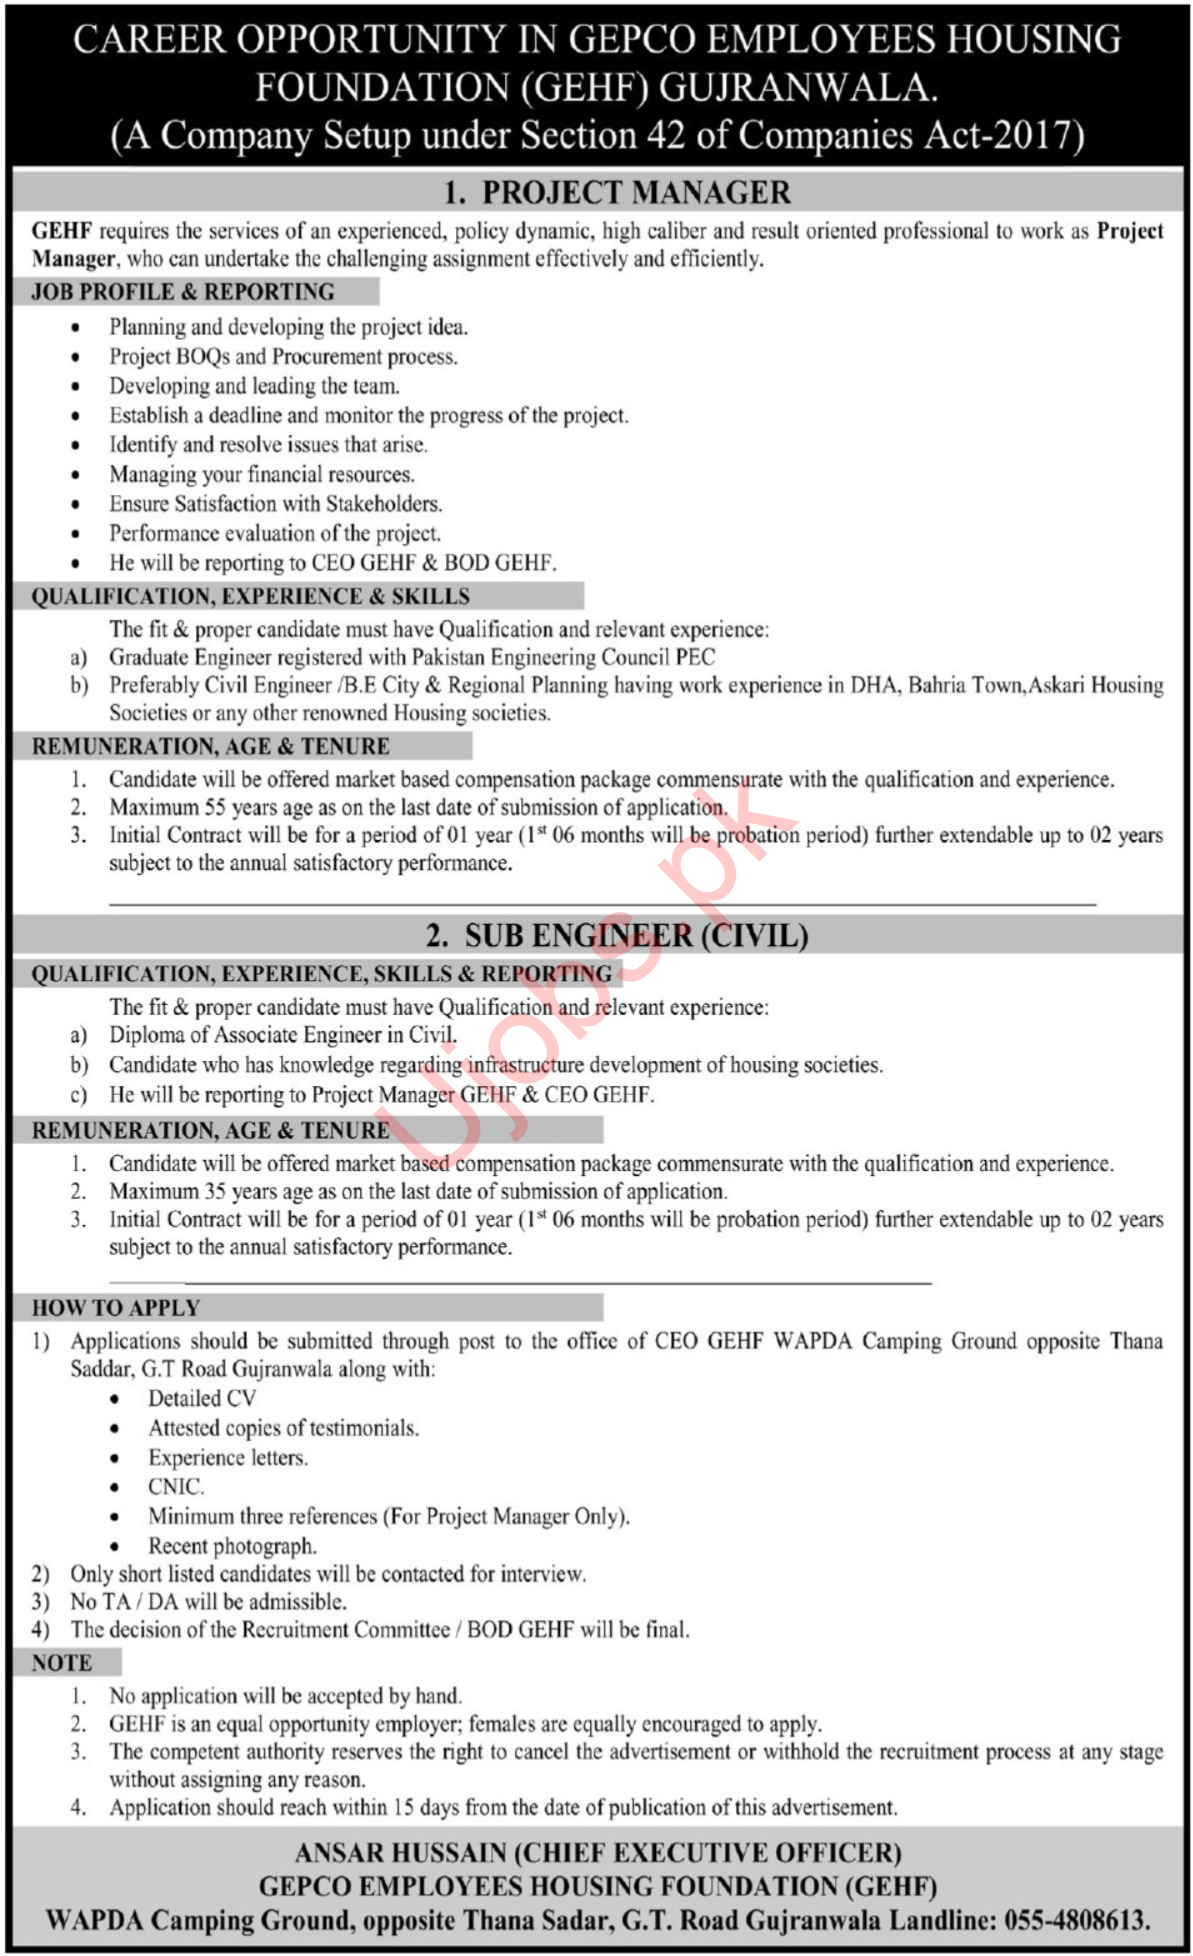 GEPCO Employees Housing Foundation Jobs 2023 - Official Advertisements